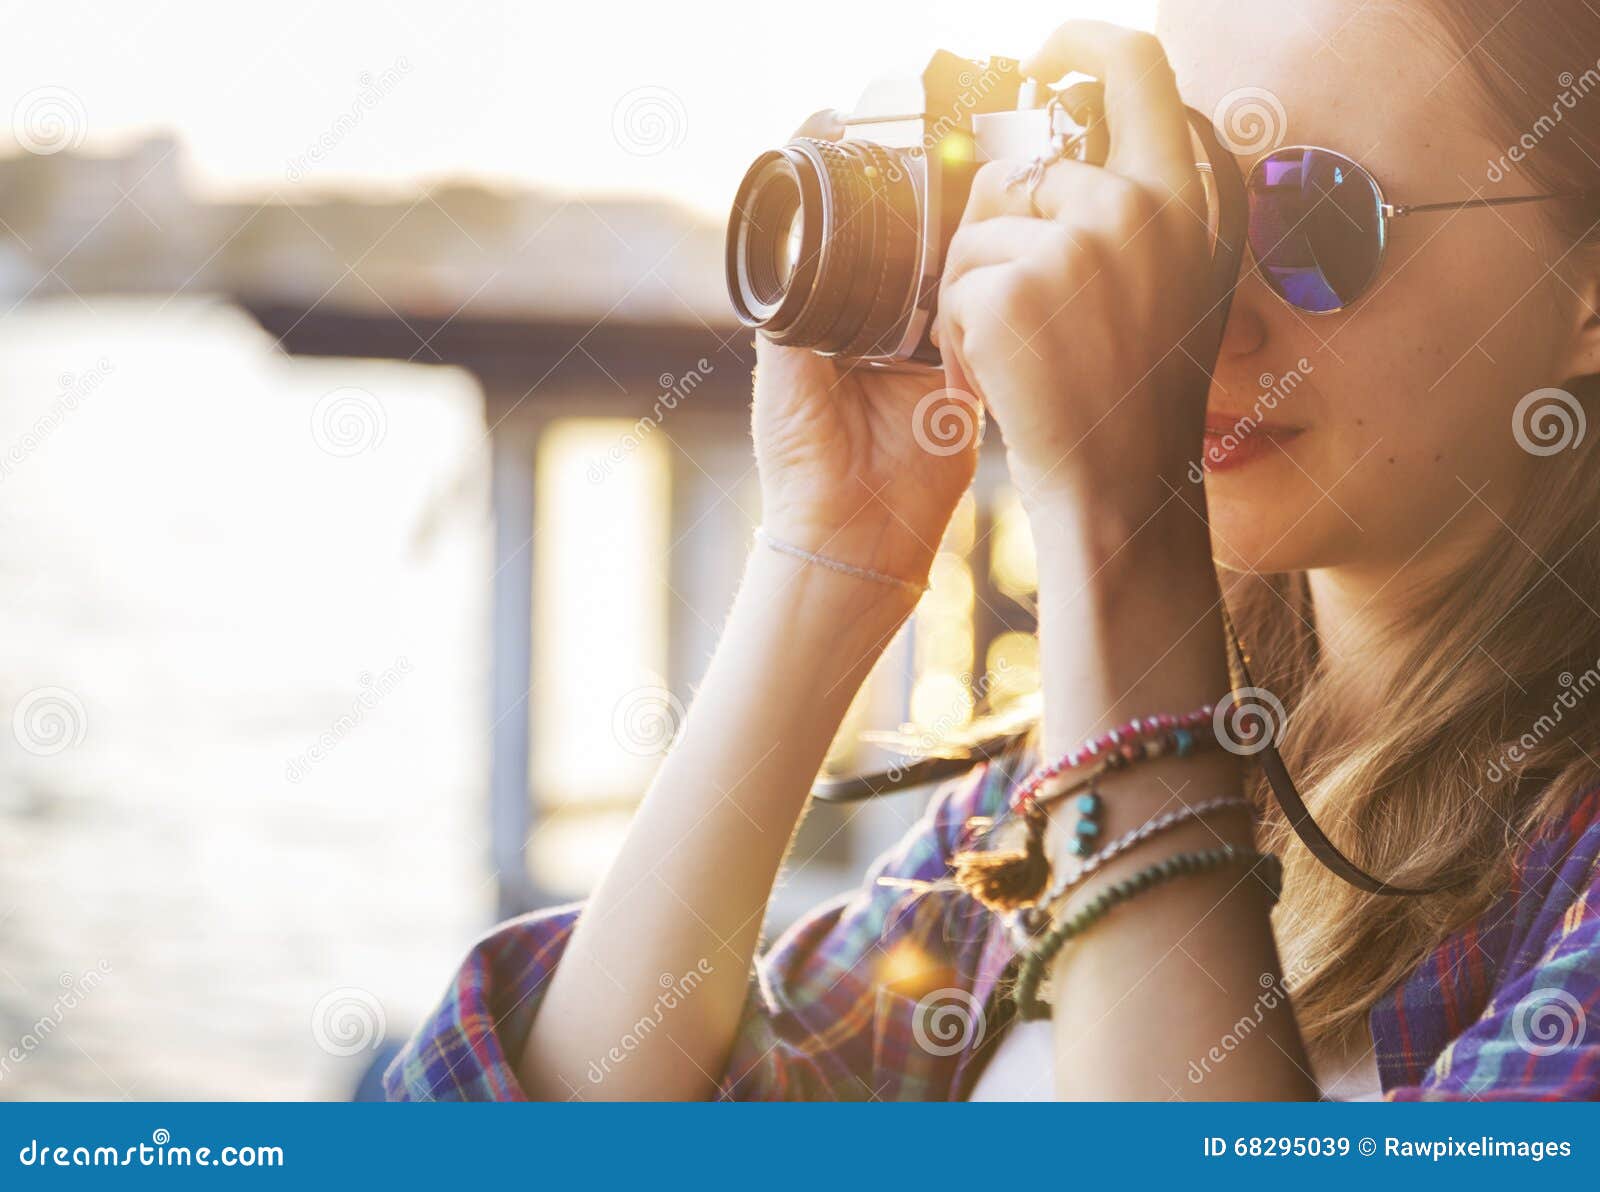 girl adventure hangout traveling holiday photography concept